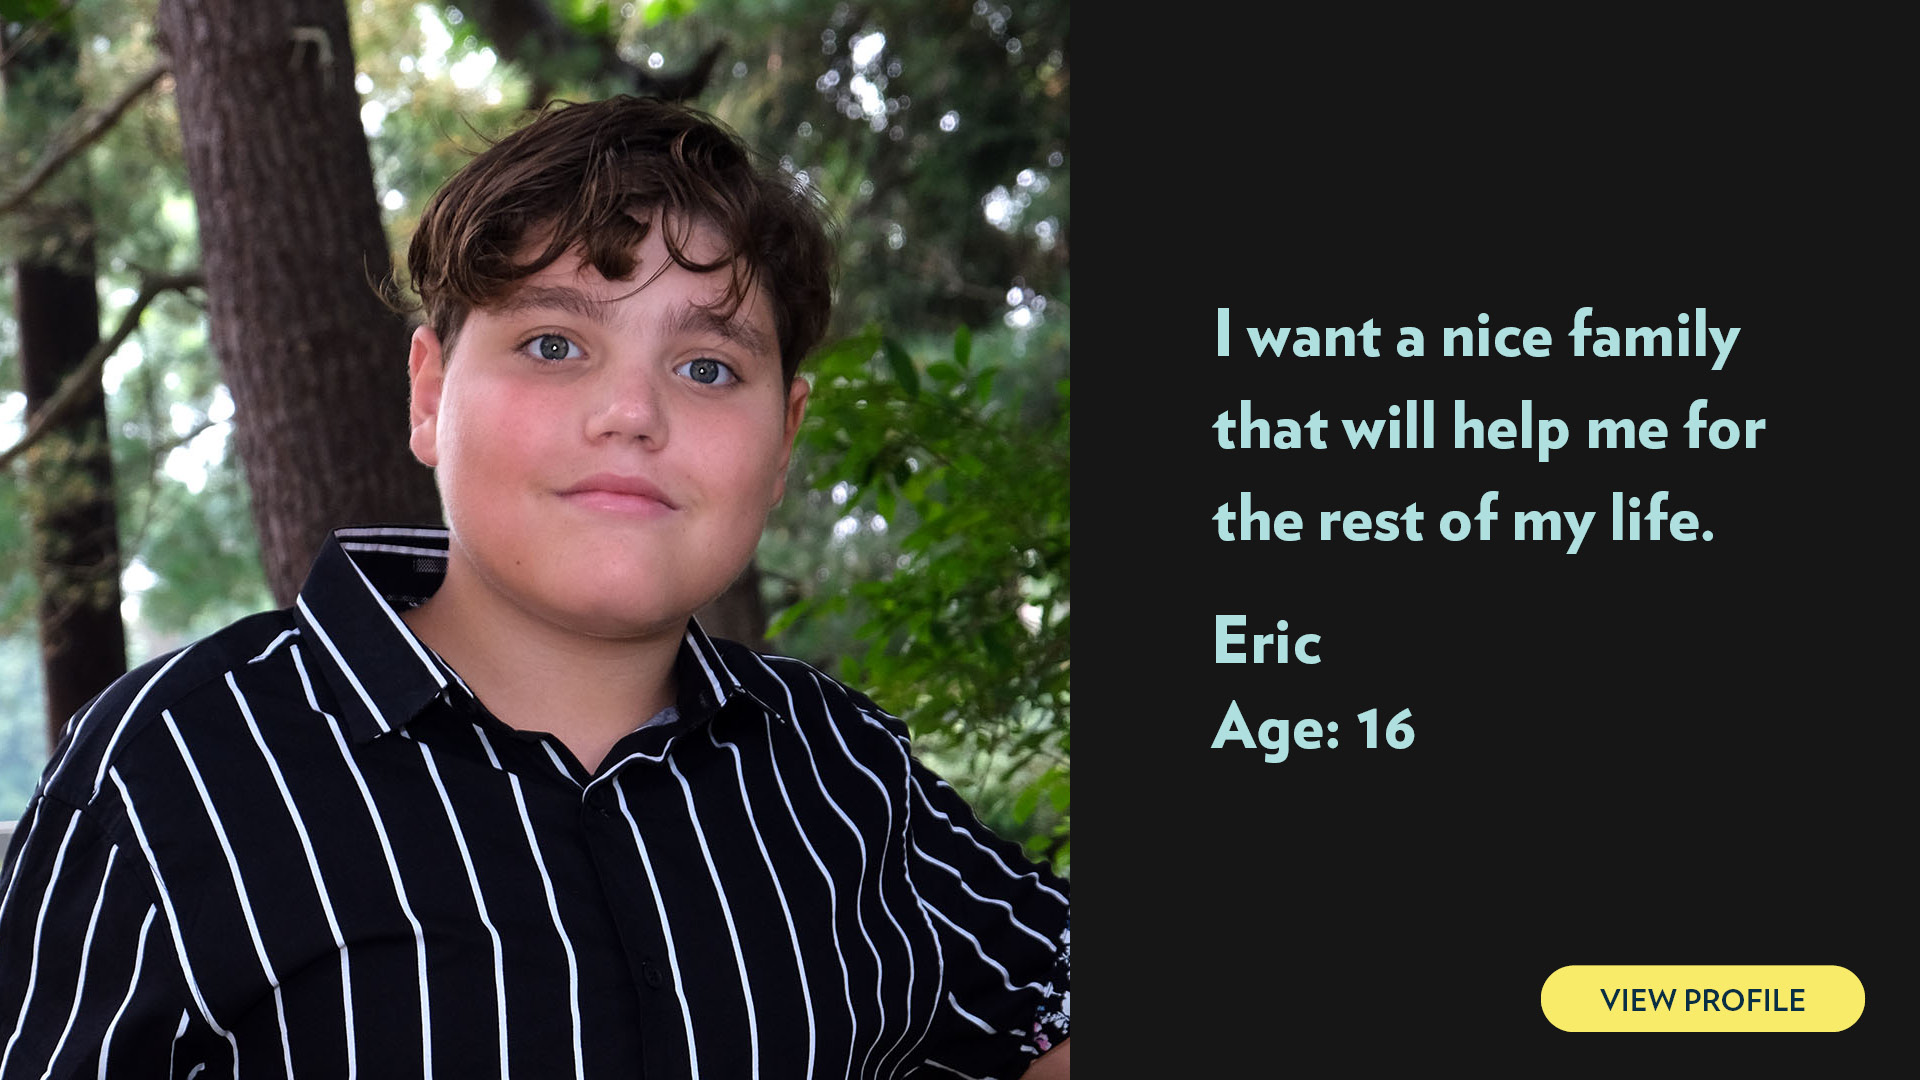 Eric, age 16. I want a nice family that will help me for the rest of my life. View profile.